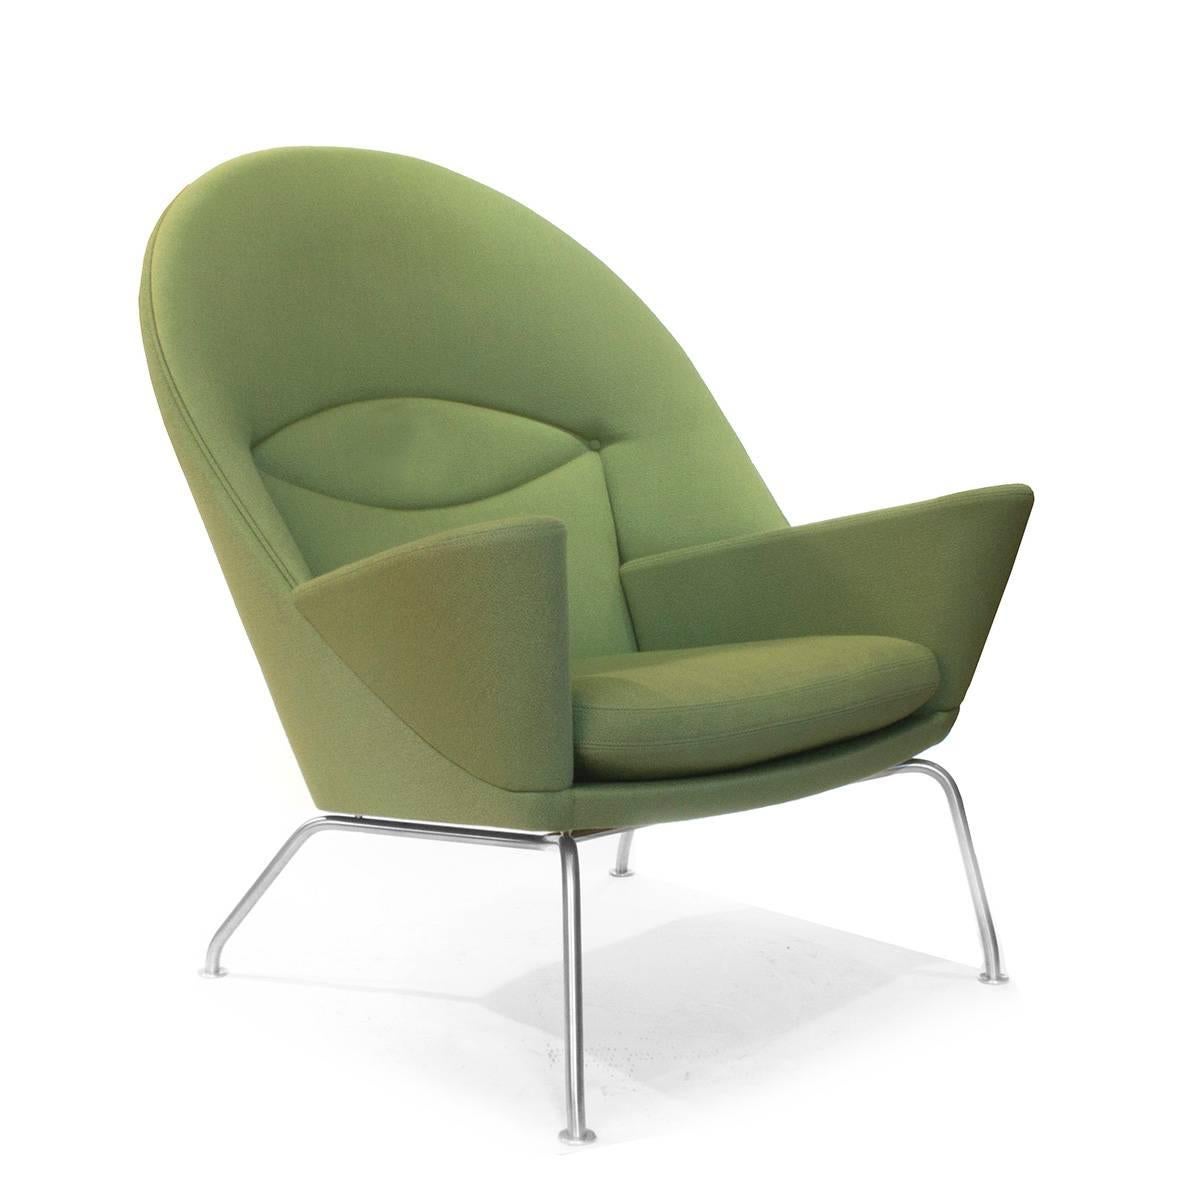 A sought-after and sculptural armchair designed by Hans J. Wegner in 1960 but not put into production until 2010. The chair is known as The Oculus. Oculus is Latin for eye and refers to the chair's curved back which forms an eye in the upholstery.